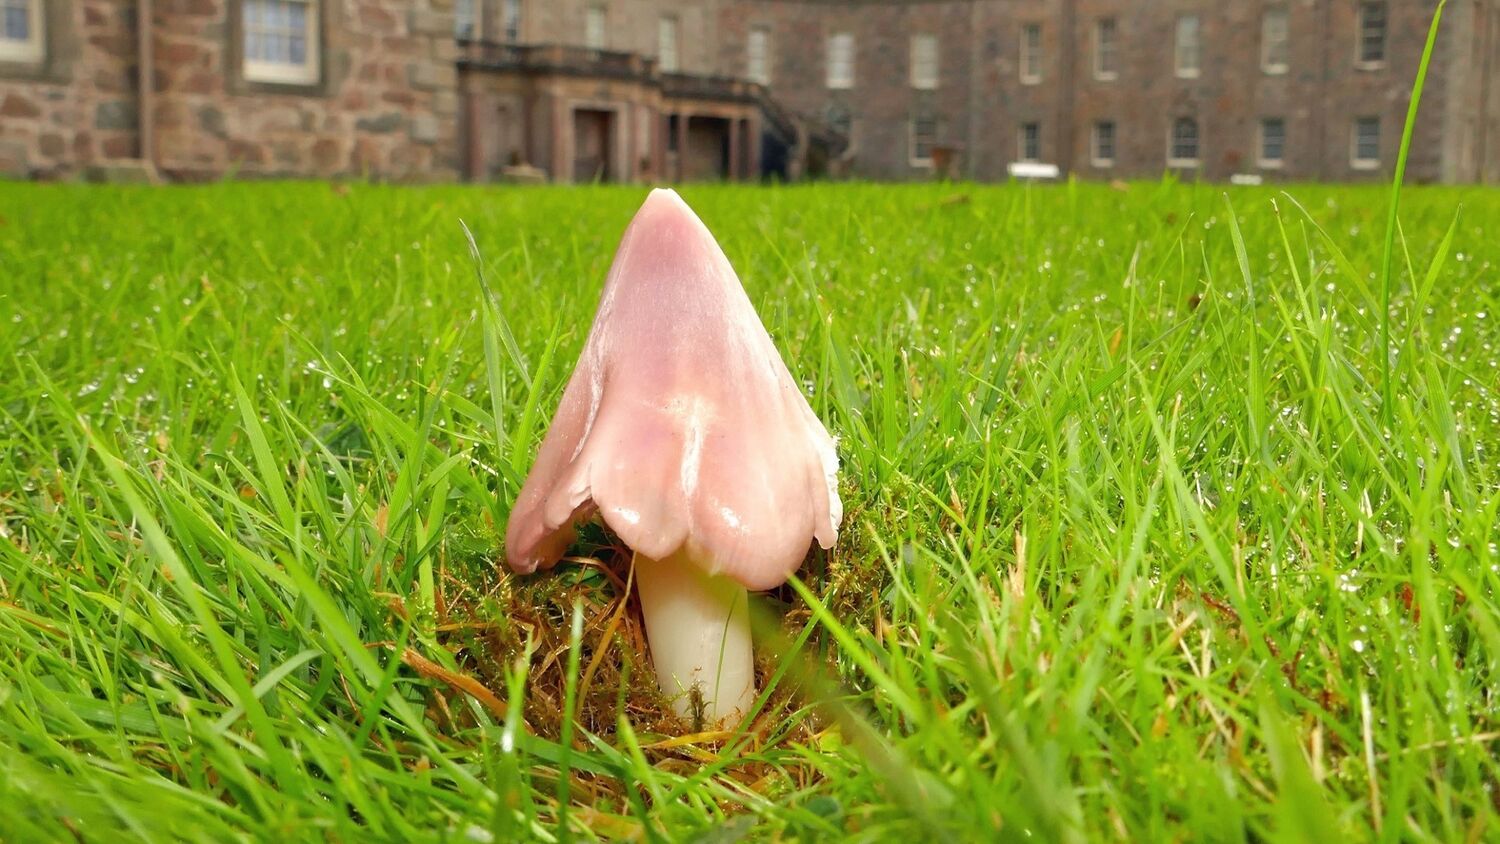 A pink cone-shaped mushroom grows on a lawn, with a grand stately home in the background.